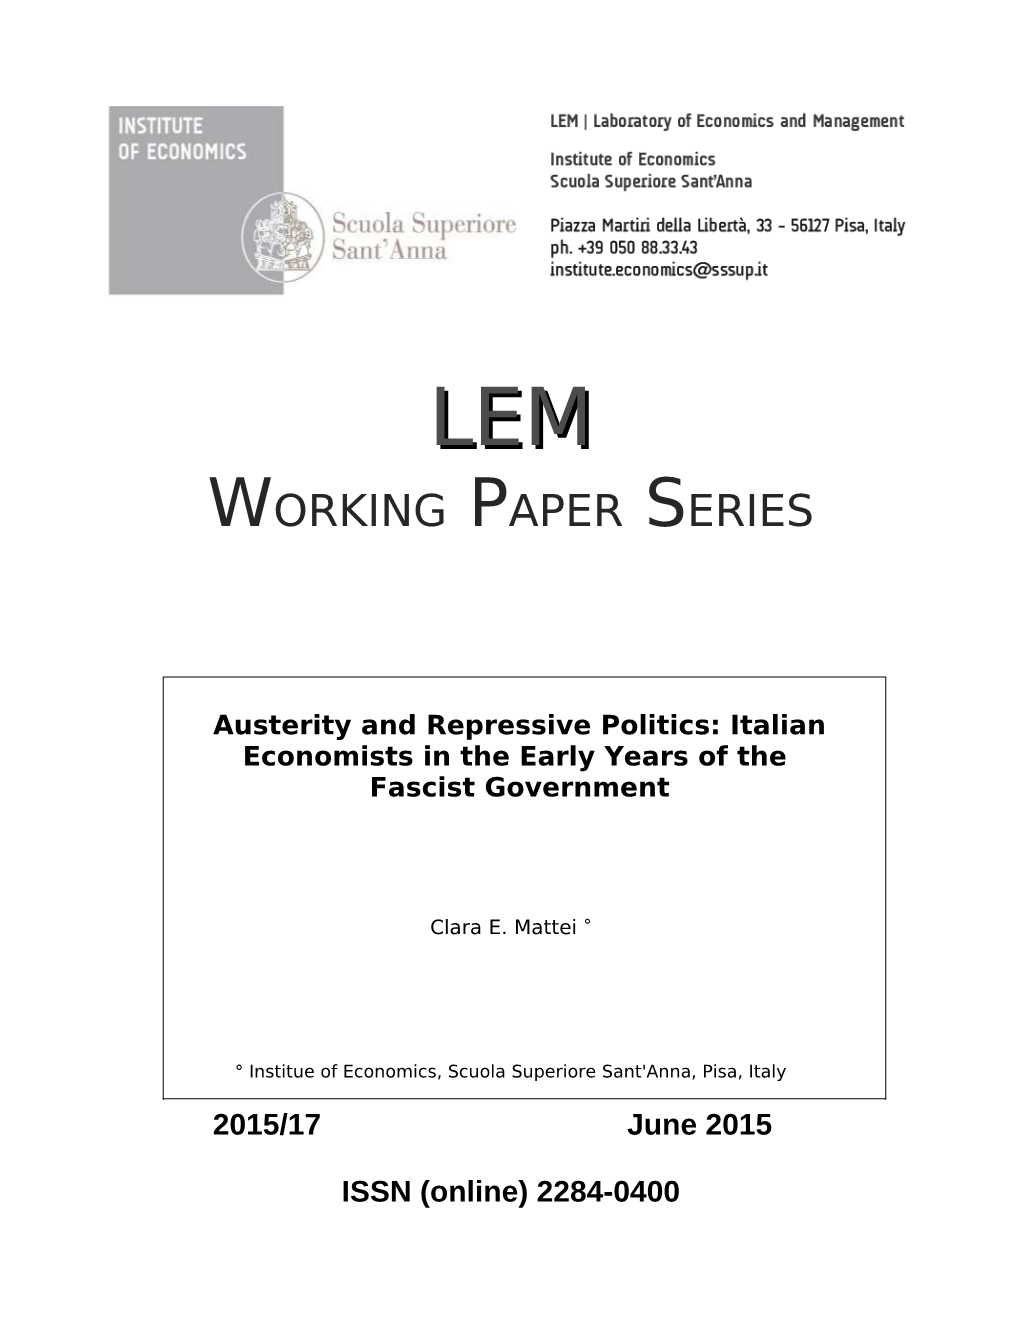 Austerity and Repressive Politics: Italian Economists in the Early Years of the Fascist Government